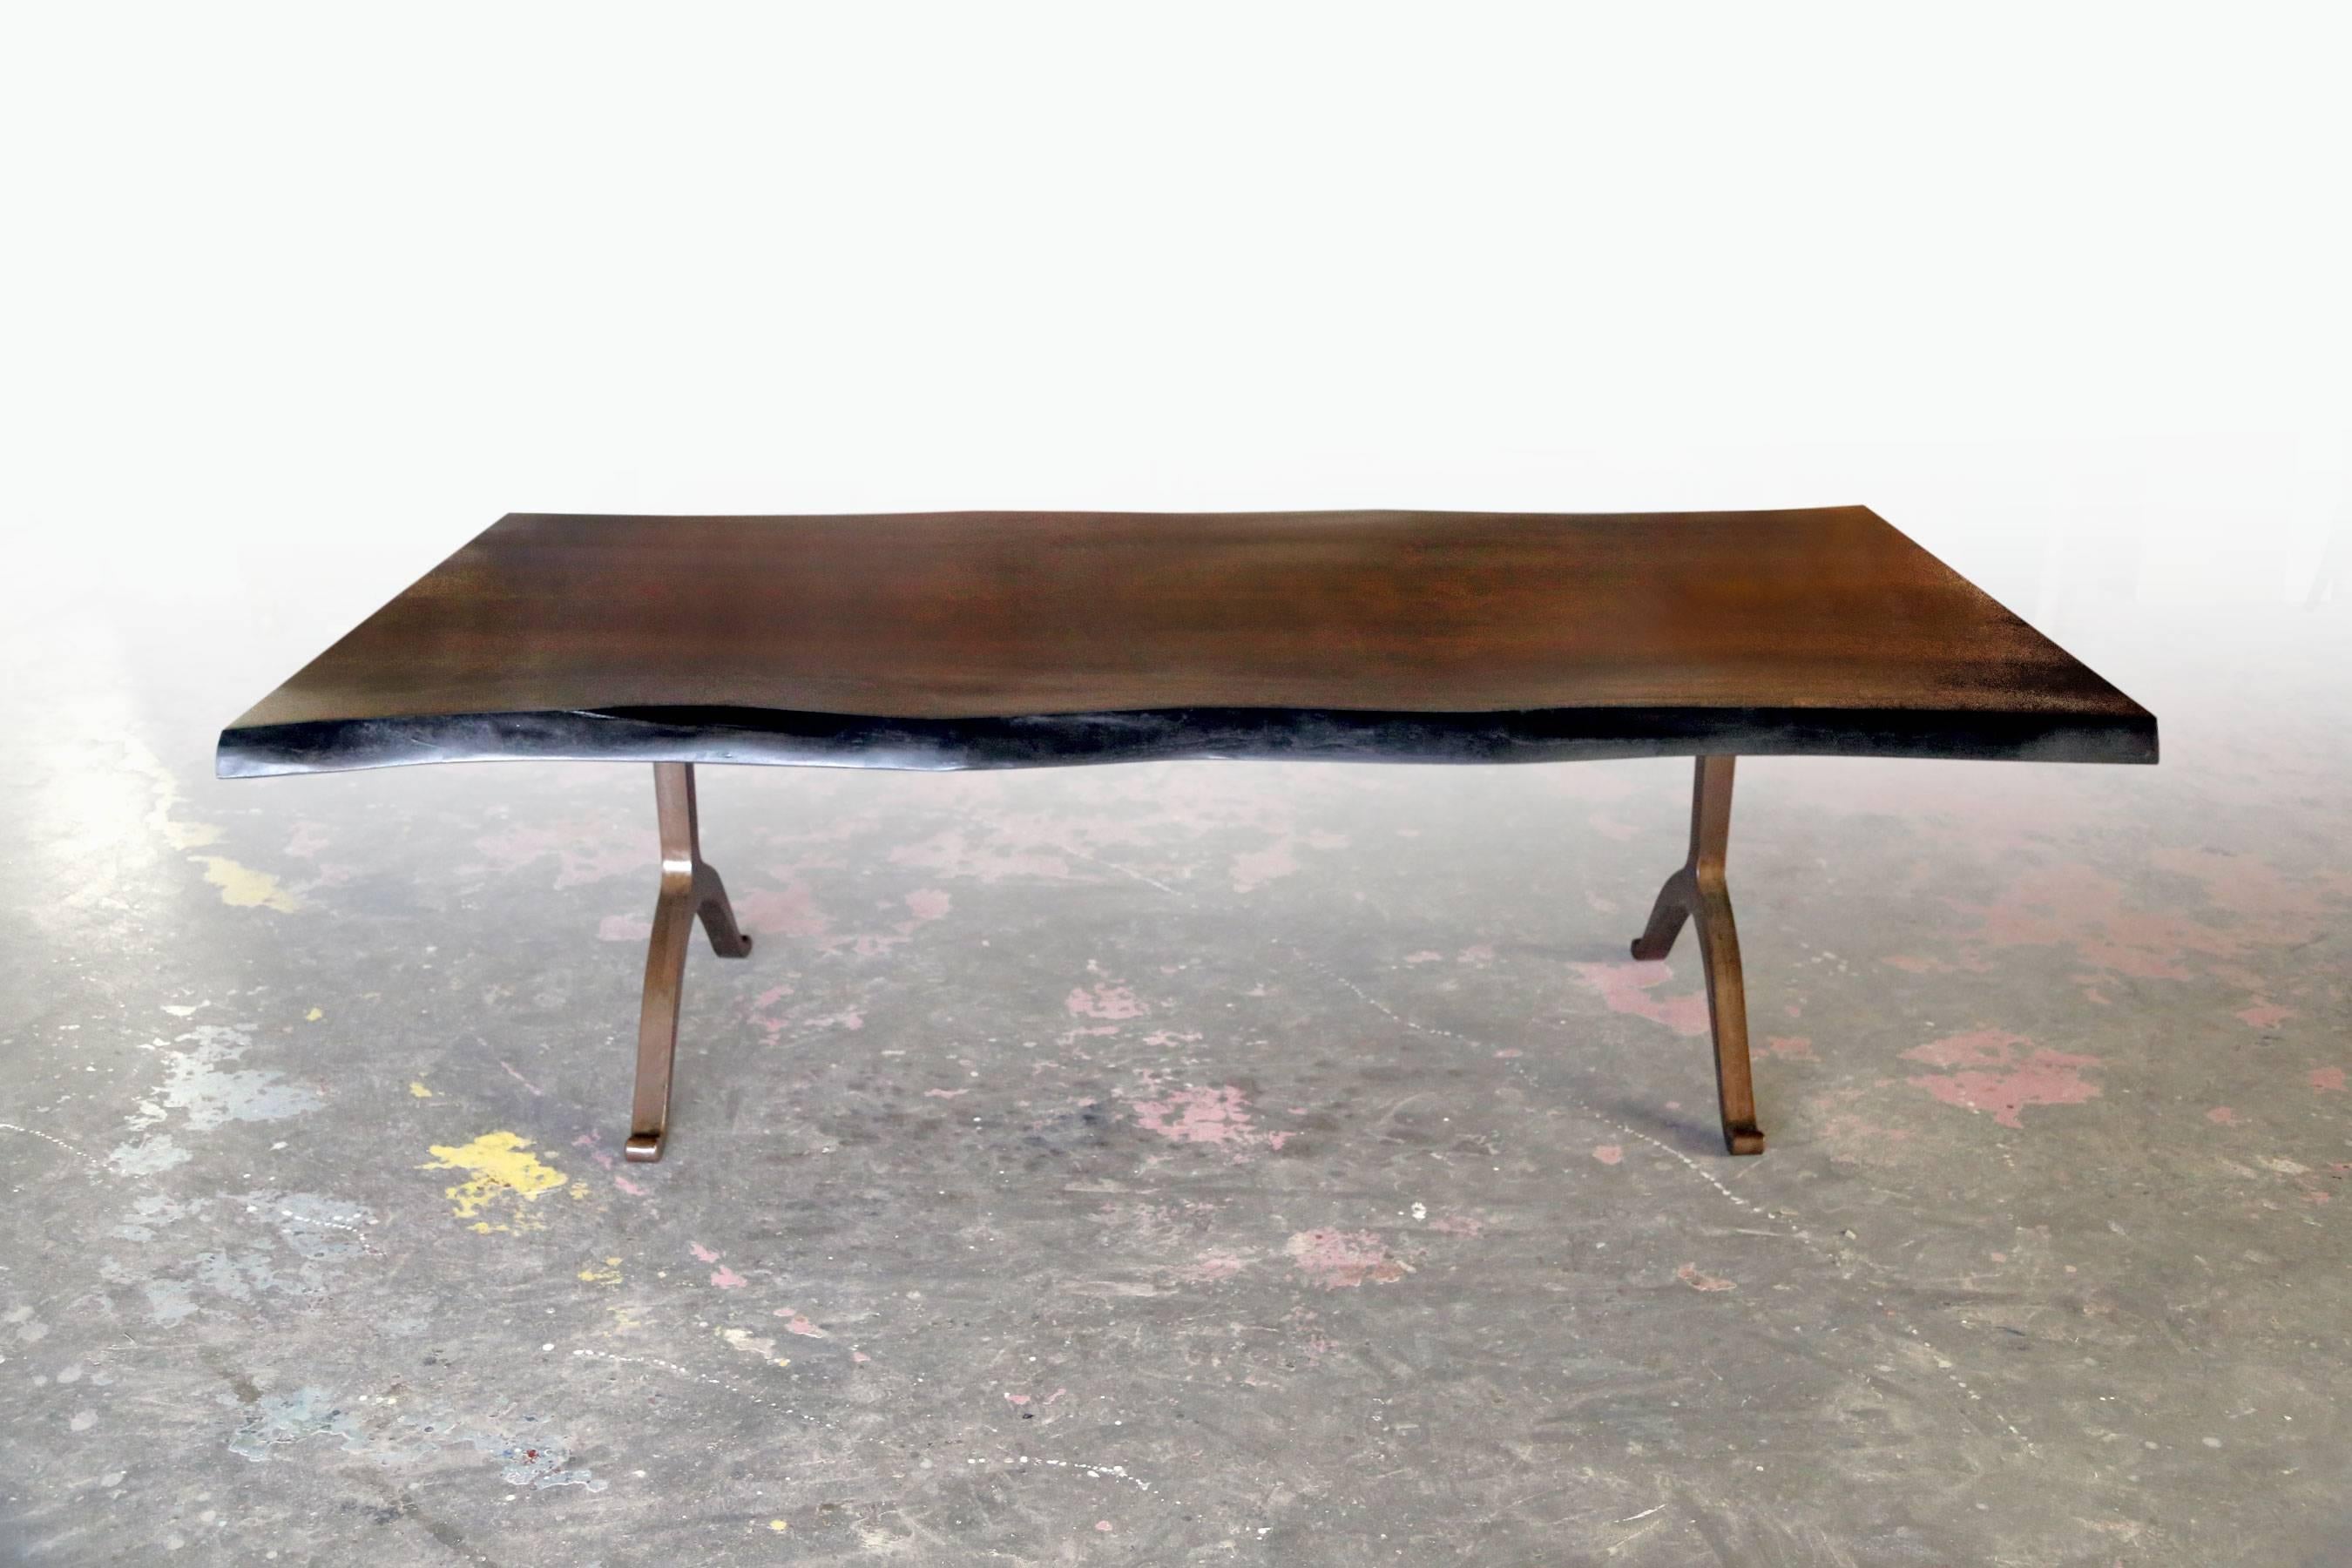 Solid American black walnut live edge tabletop paired with our solid bronzed steel wishbone legs at 84 x 36 and 30 inches tall. 

Our tables let the walnut grain speak for itself with a durable clear coat finish over the wood and no stain. Our work